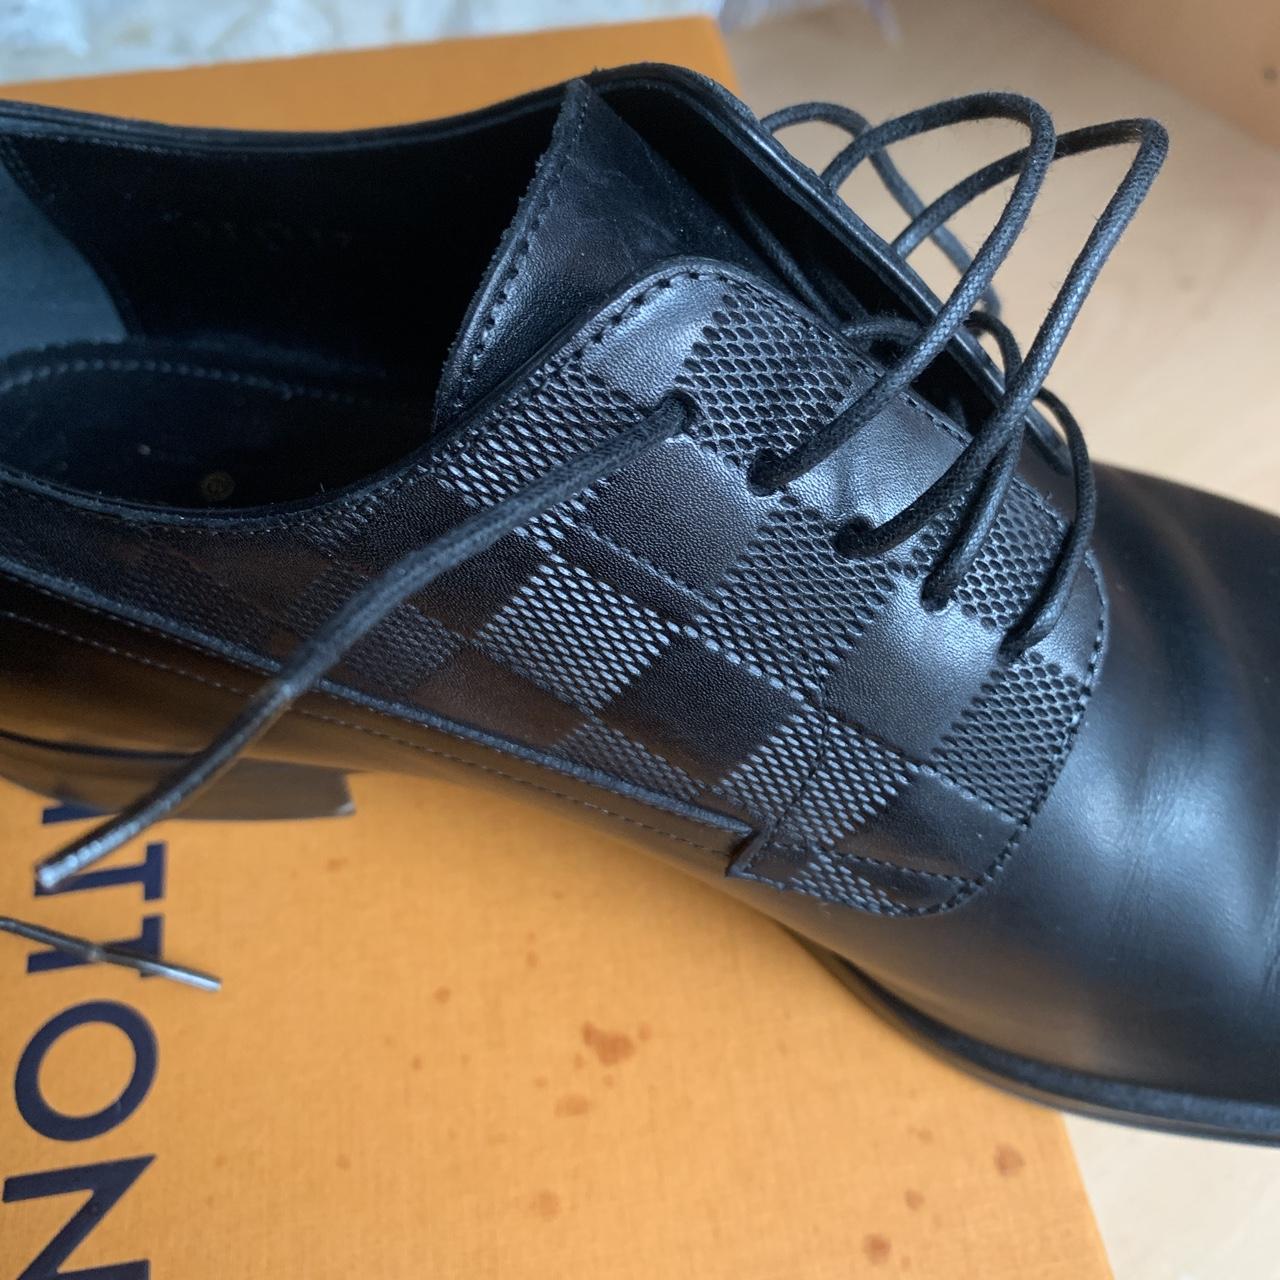 Louis Vuitton Haussmann Derby shoes purchased from - Depop